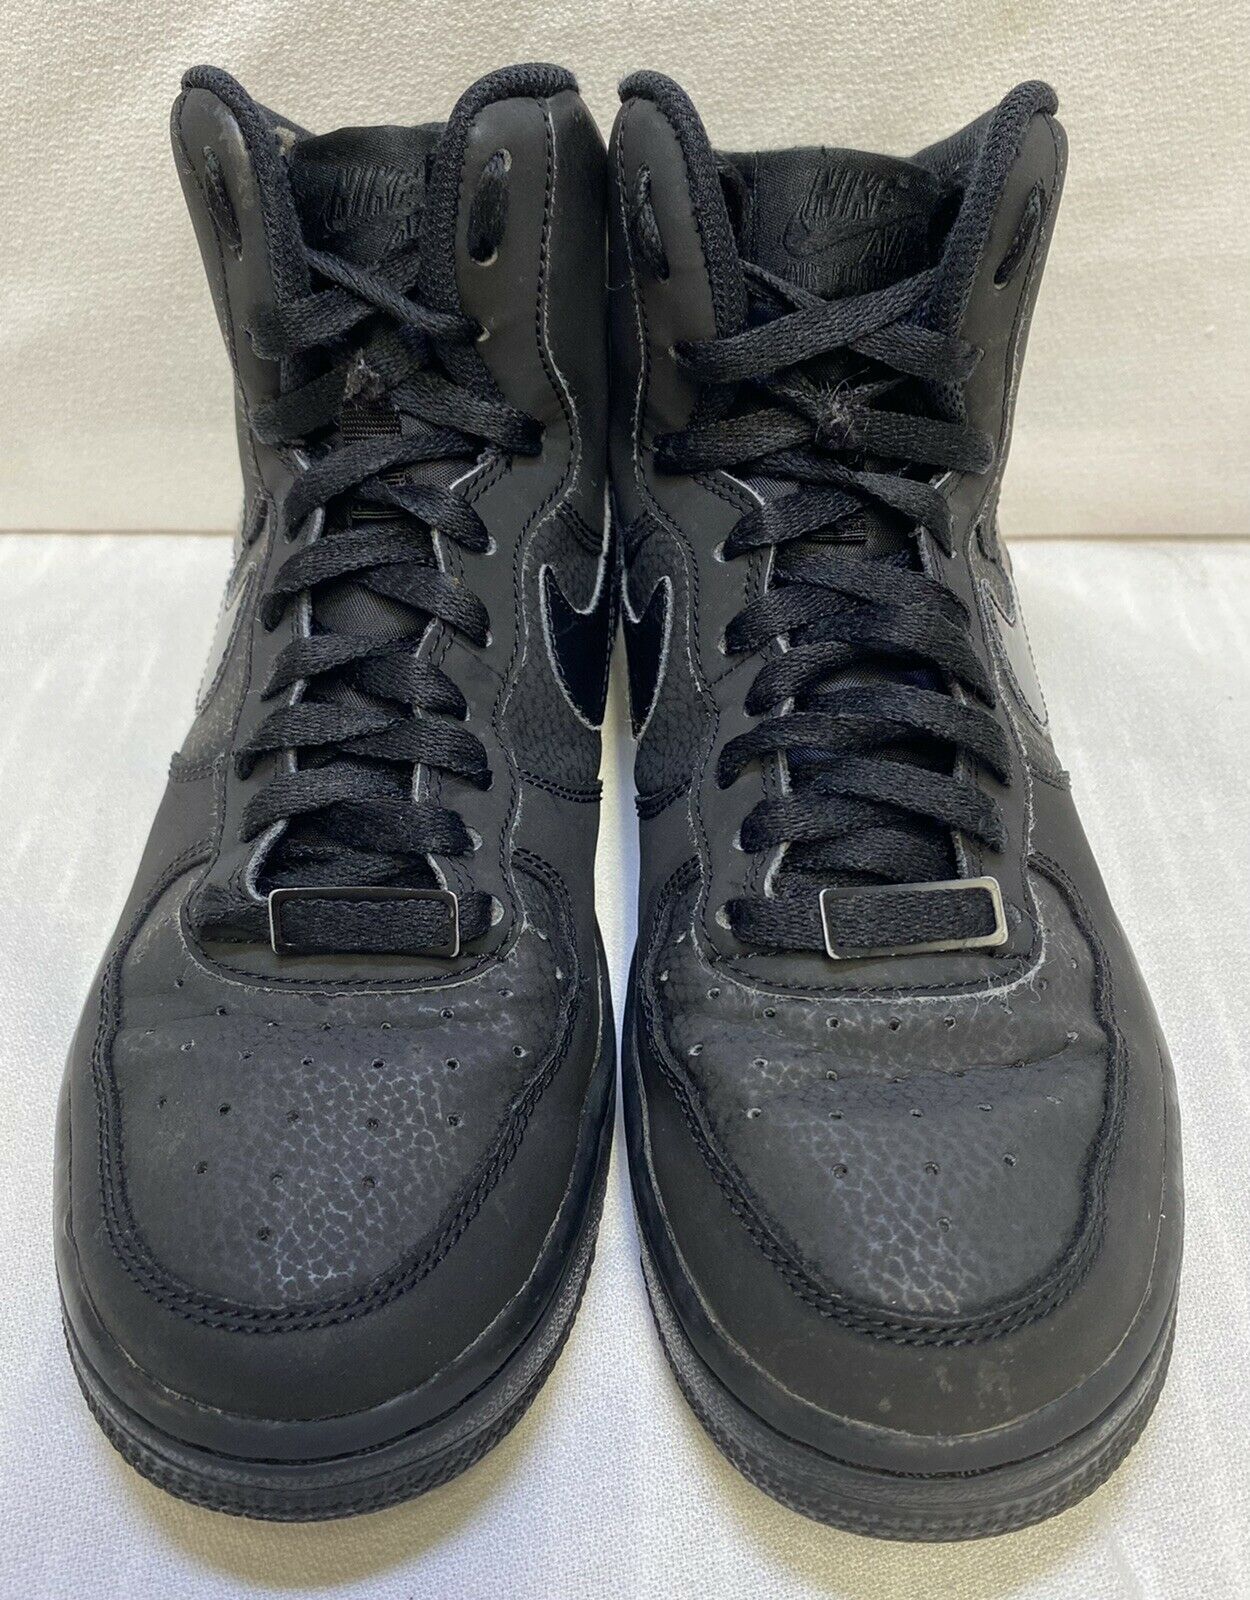 Nike Air Force 1 Mid Shoes All Black 5.5Y 653998-001 Youth